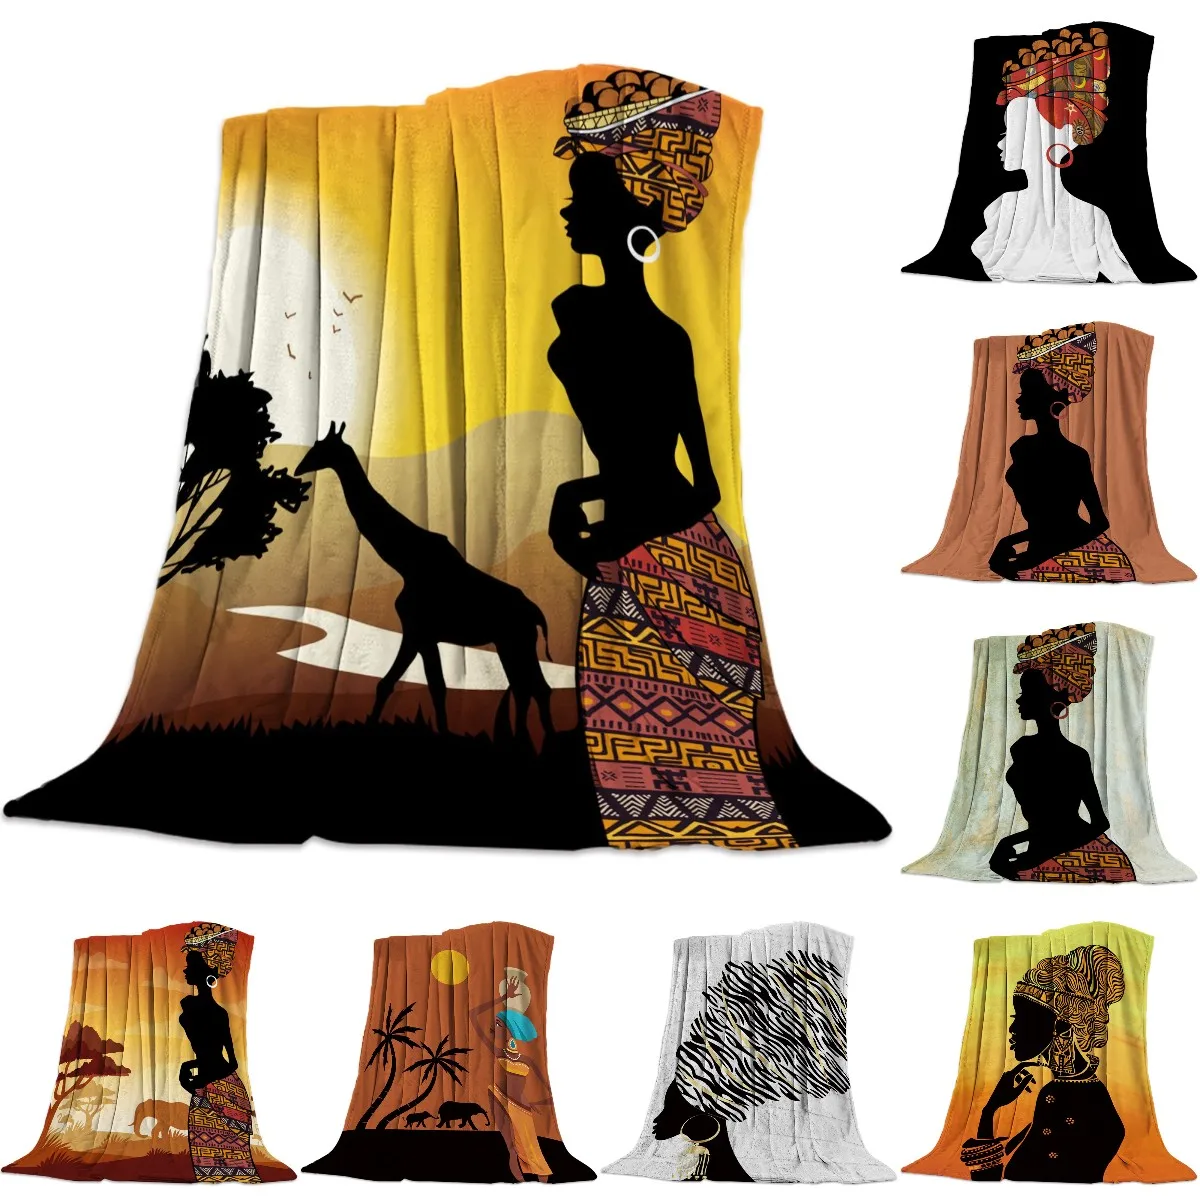 African Tribal Women Flannel Blanket Fuzzy Bedspread Nap Shawl for Bed Sofa Cover Soft Plush Warm Throw Blanket Queen King Size